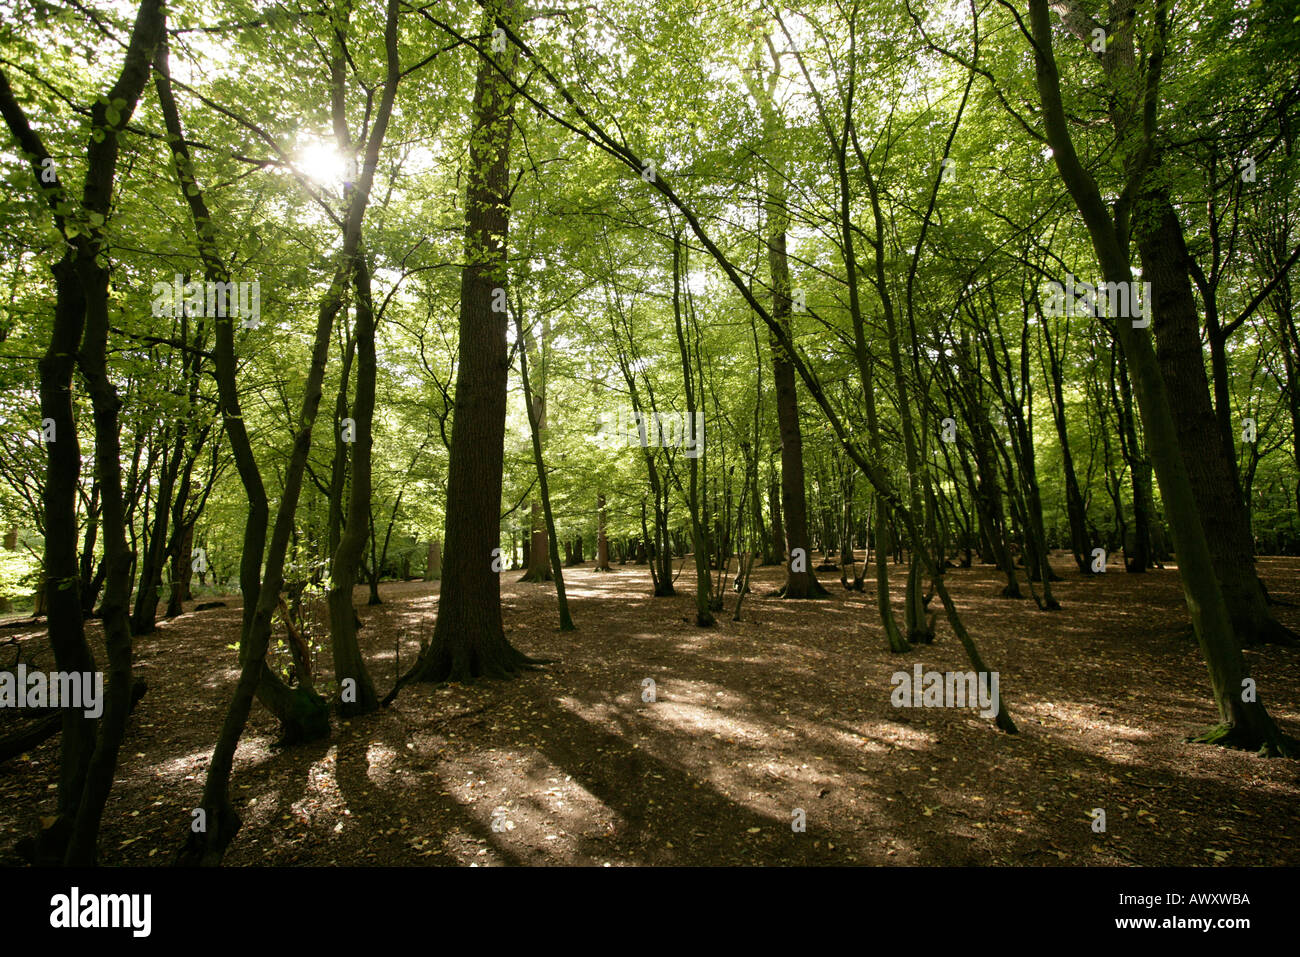 green broadleaf trees in an English wood with dappled sunlight streaming through the branches. Stock Photo